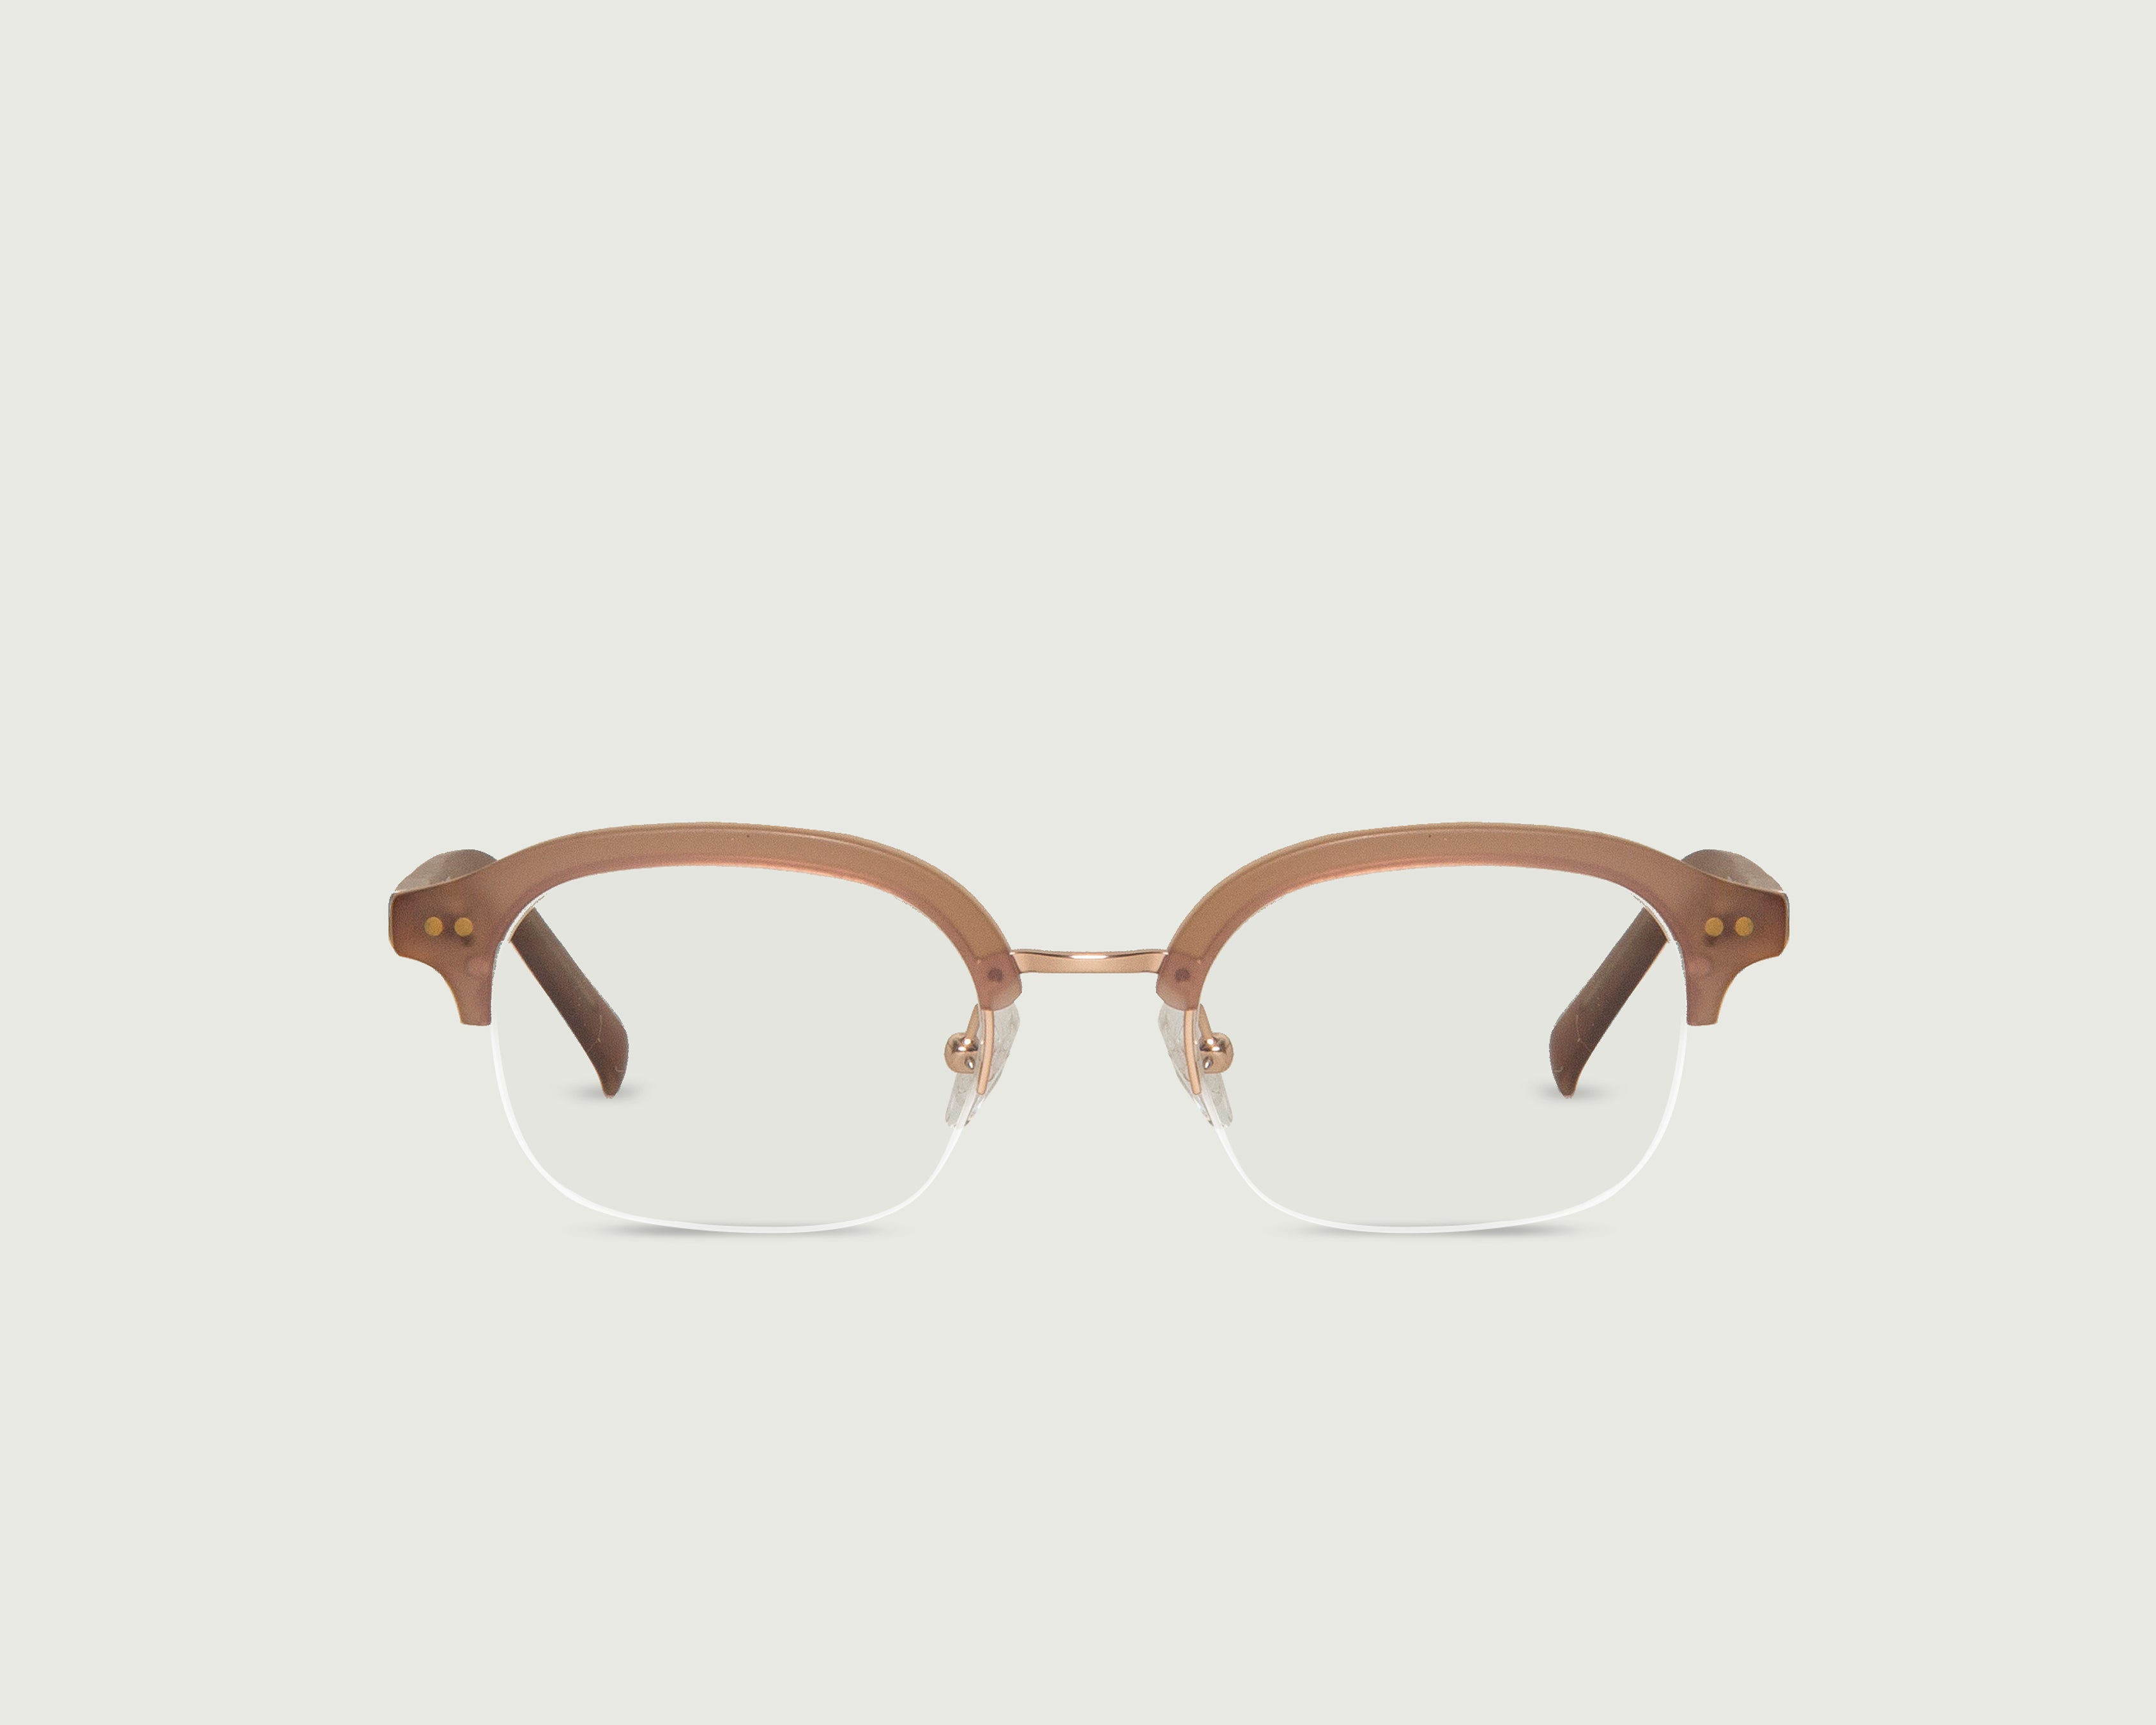 Wheat::Gregor Eyeglasses browline taupe acetate front